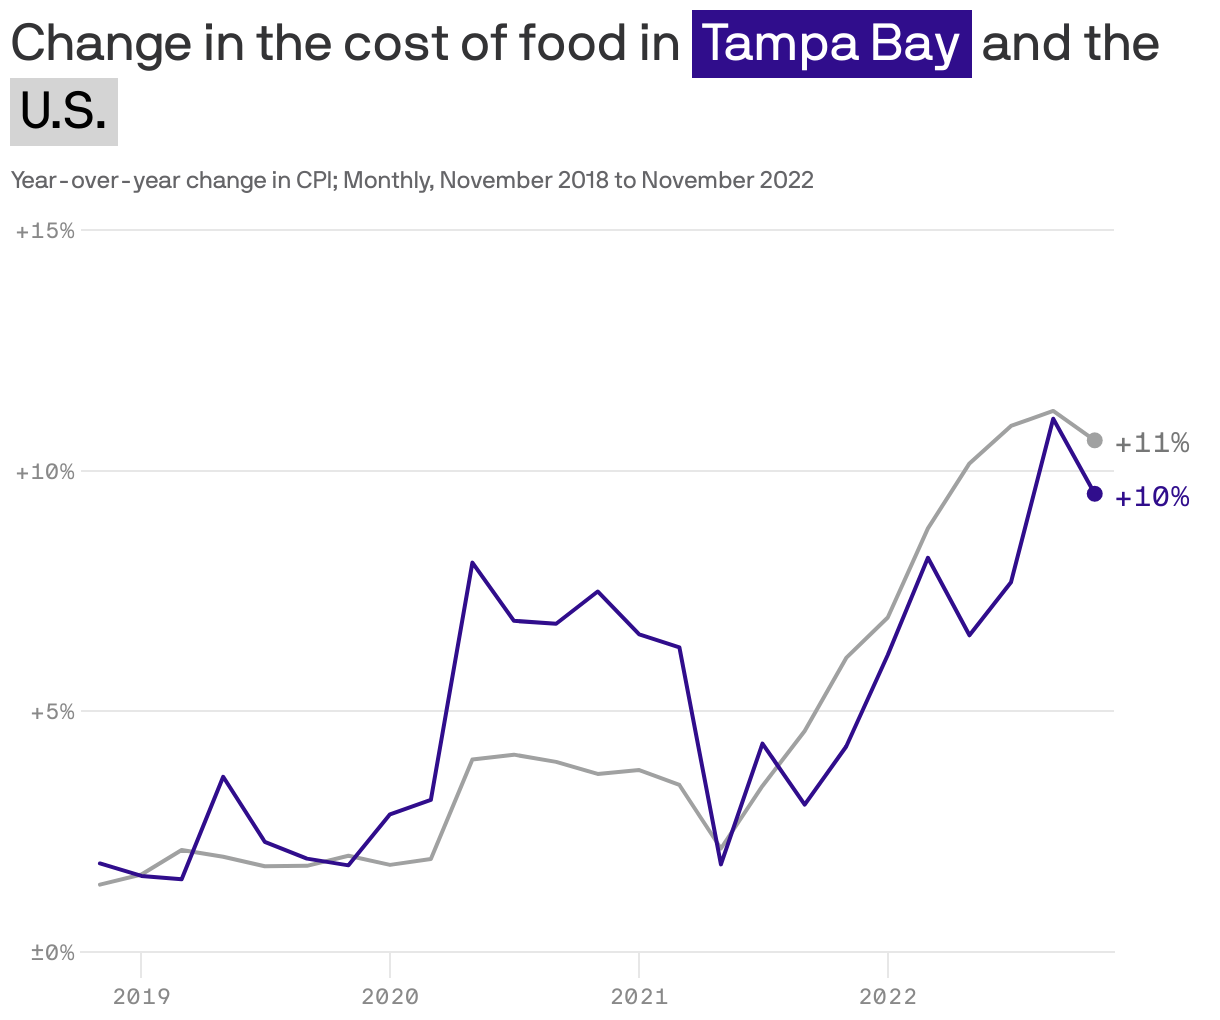 Change in the cost of food in <span style="color: white; background-color: #300d8c; padding: 0px 5px; display: inline-block; white-space: nowrap; font-weight: 400;">Tampa Bay</span> and the <span style="color: black; background-color: #D4D4D4; padding: 0px 5px; display: inline-block; white-space: nowrap; font-weight: 400;">U.S.</span>